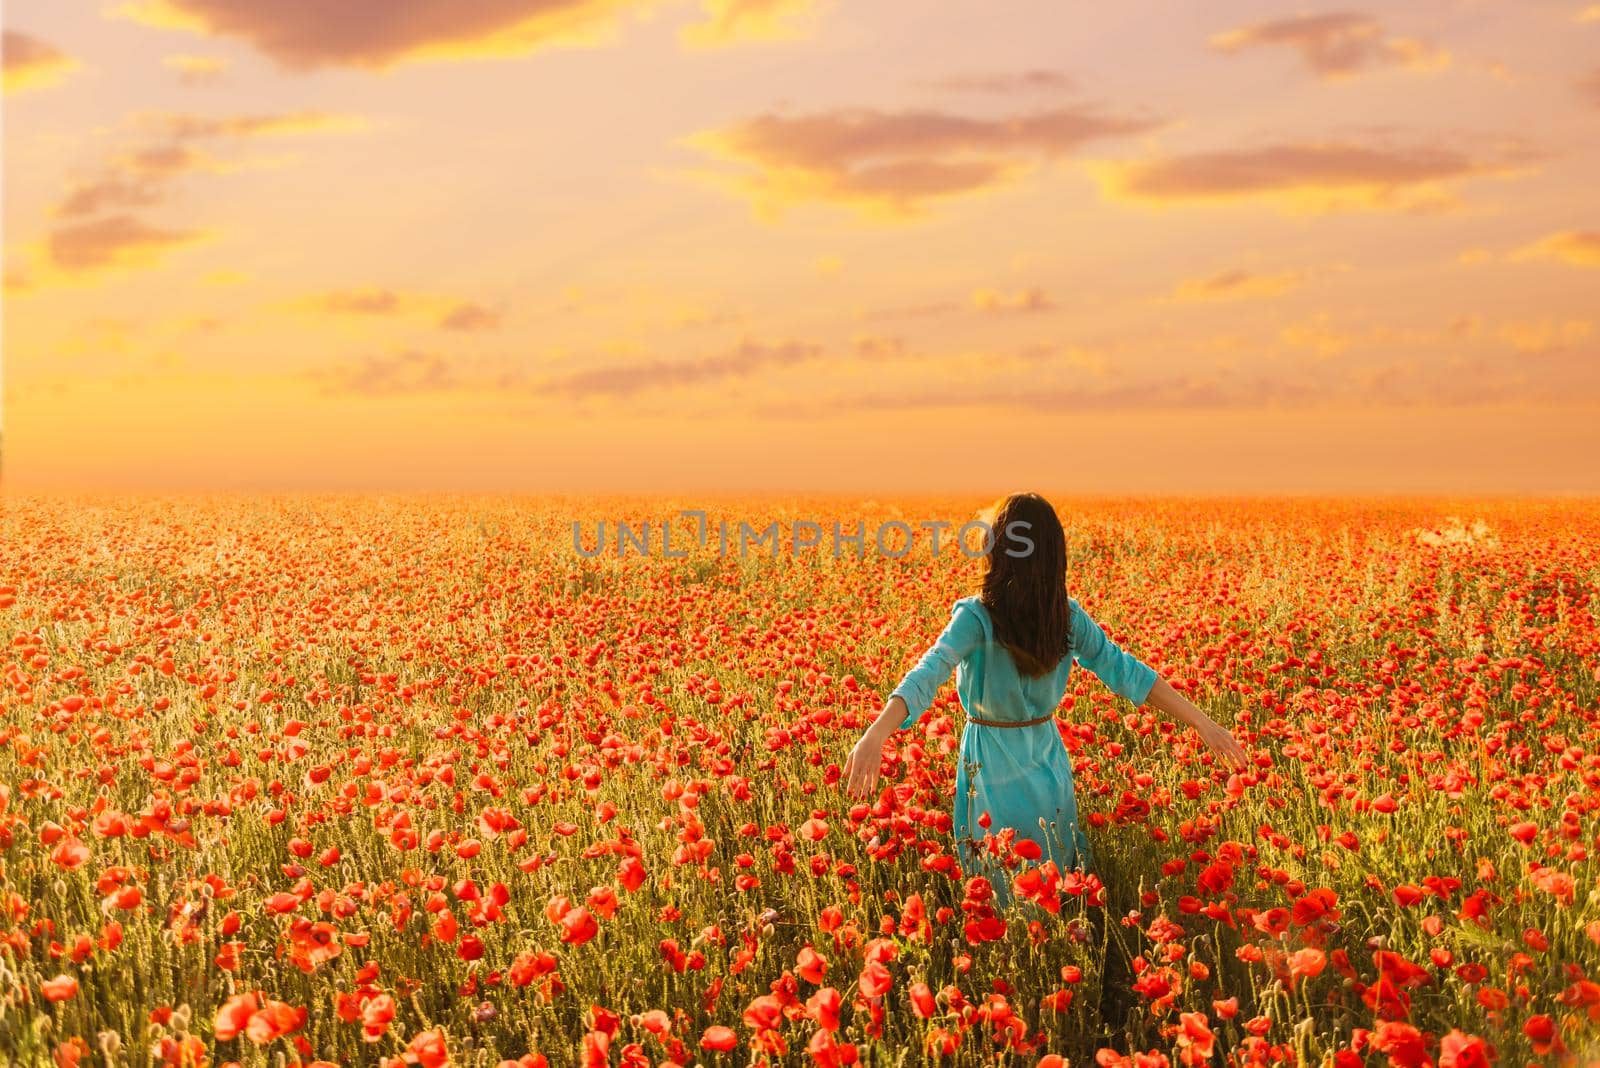 Woman walking in red poppies meadow at sunset. by alexAleksei